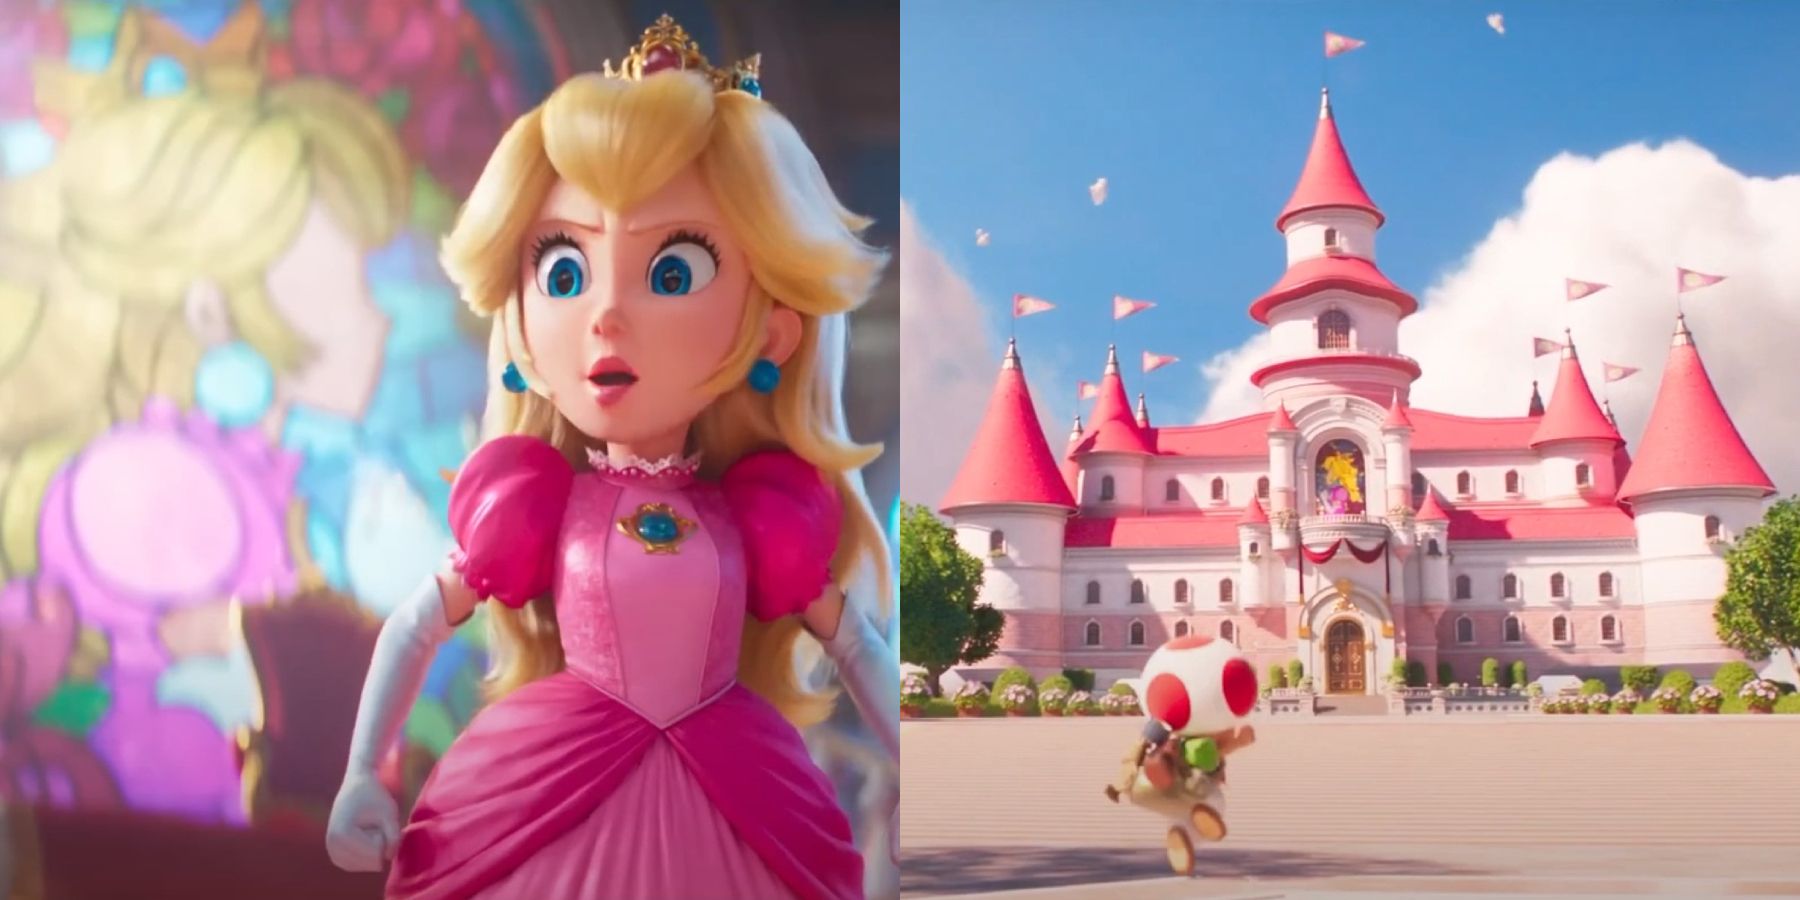 Peach next to stained glass and Castle in Super Mario Bros. movie split image